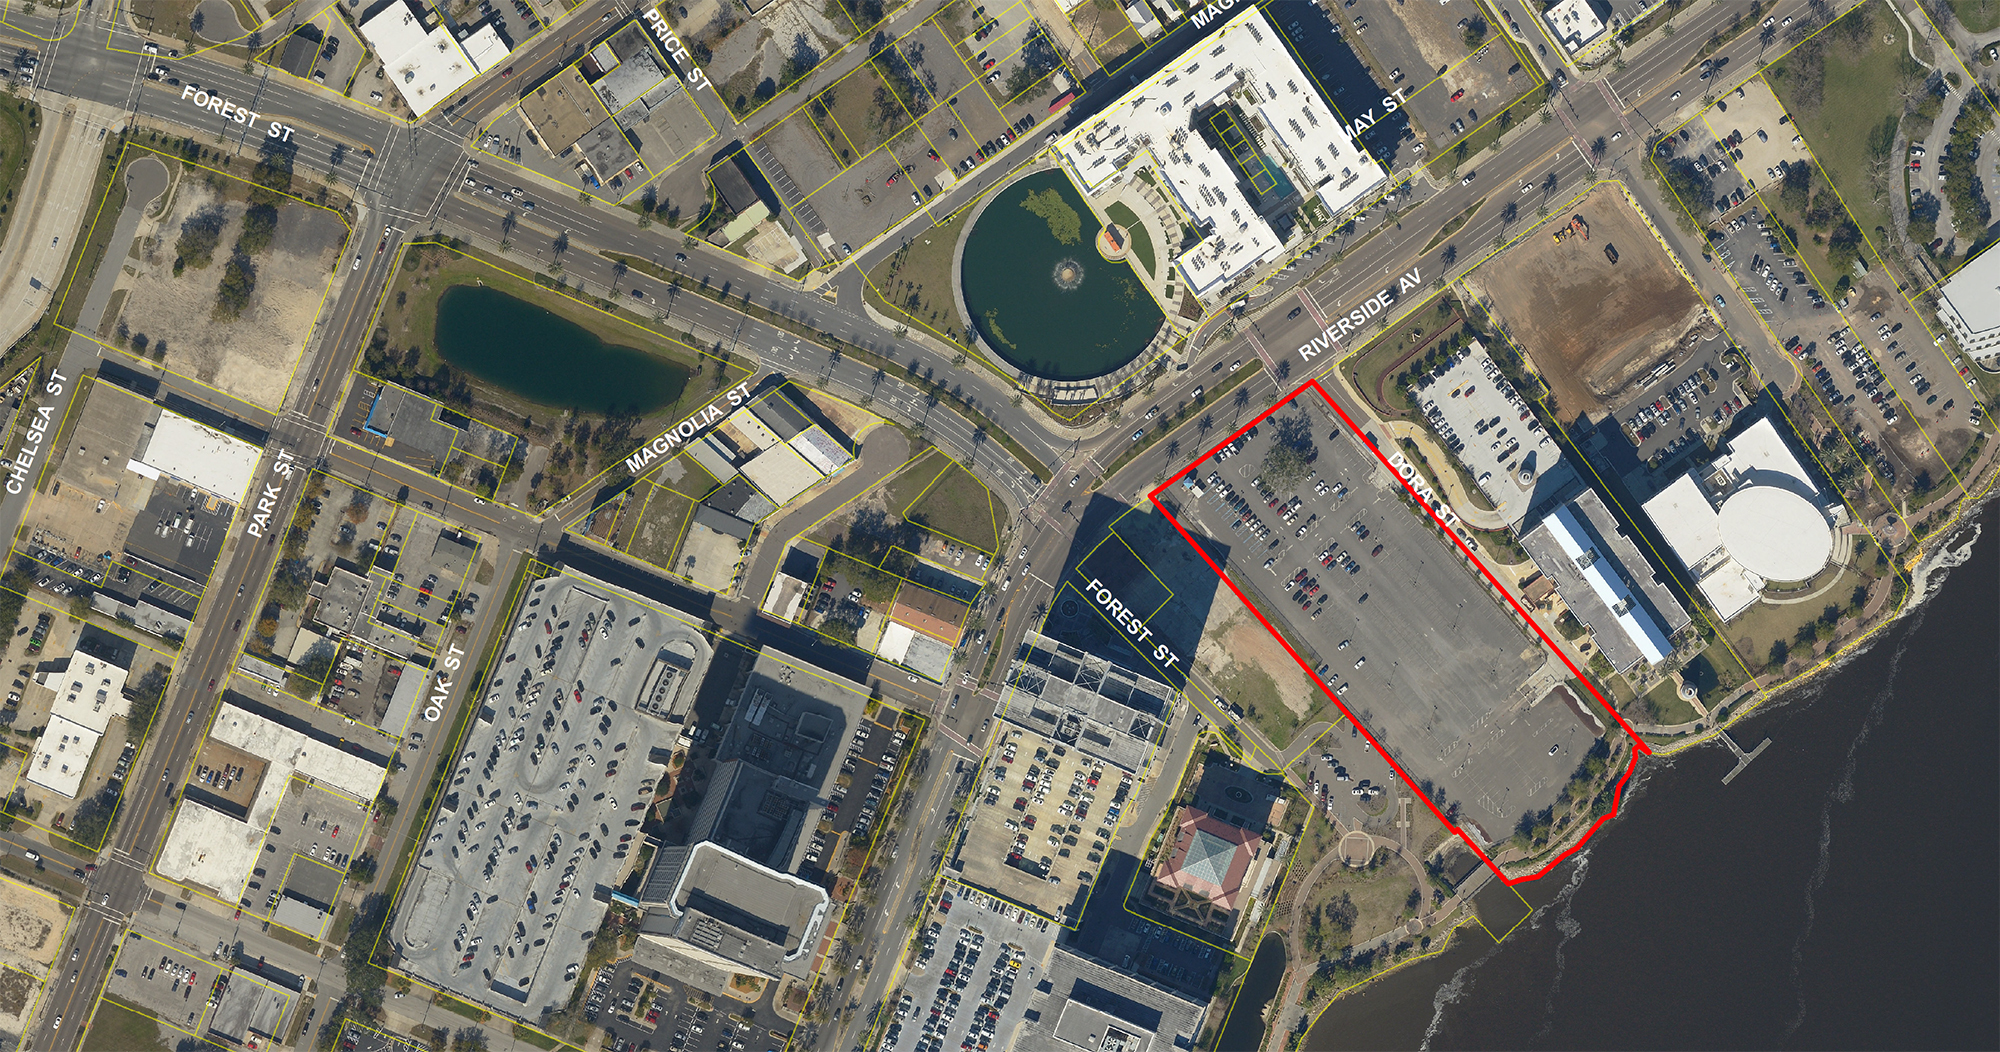 Project Sharp calls for a 300,000-square-foot office building for a $145 million corporate headquarters Downtown. This map was included with the DIA resolution.